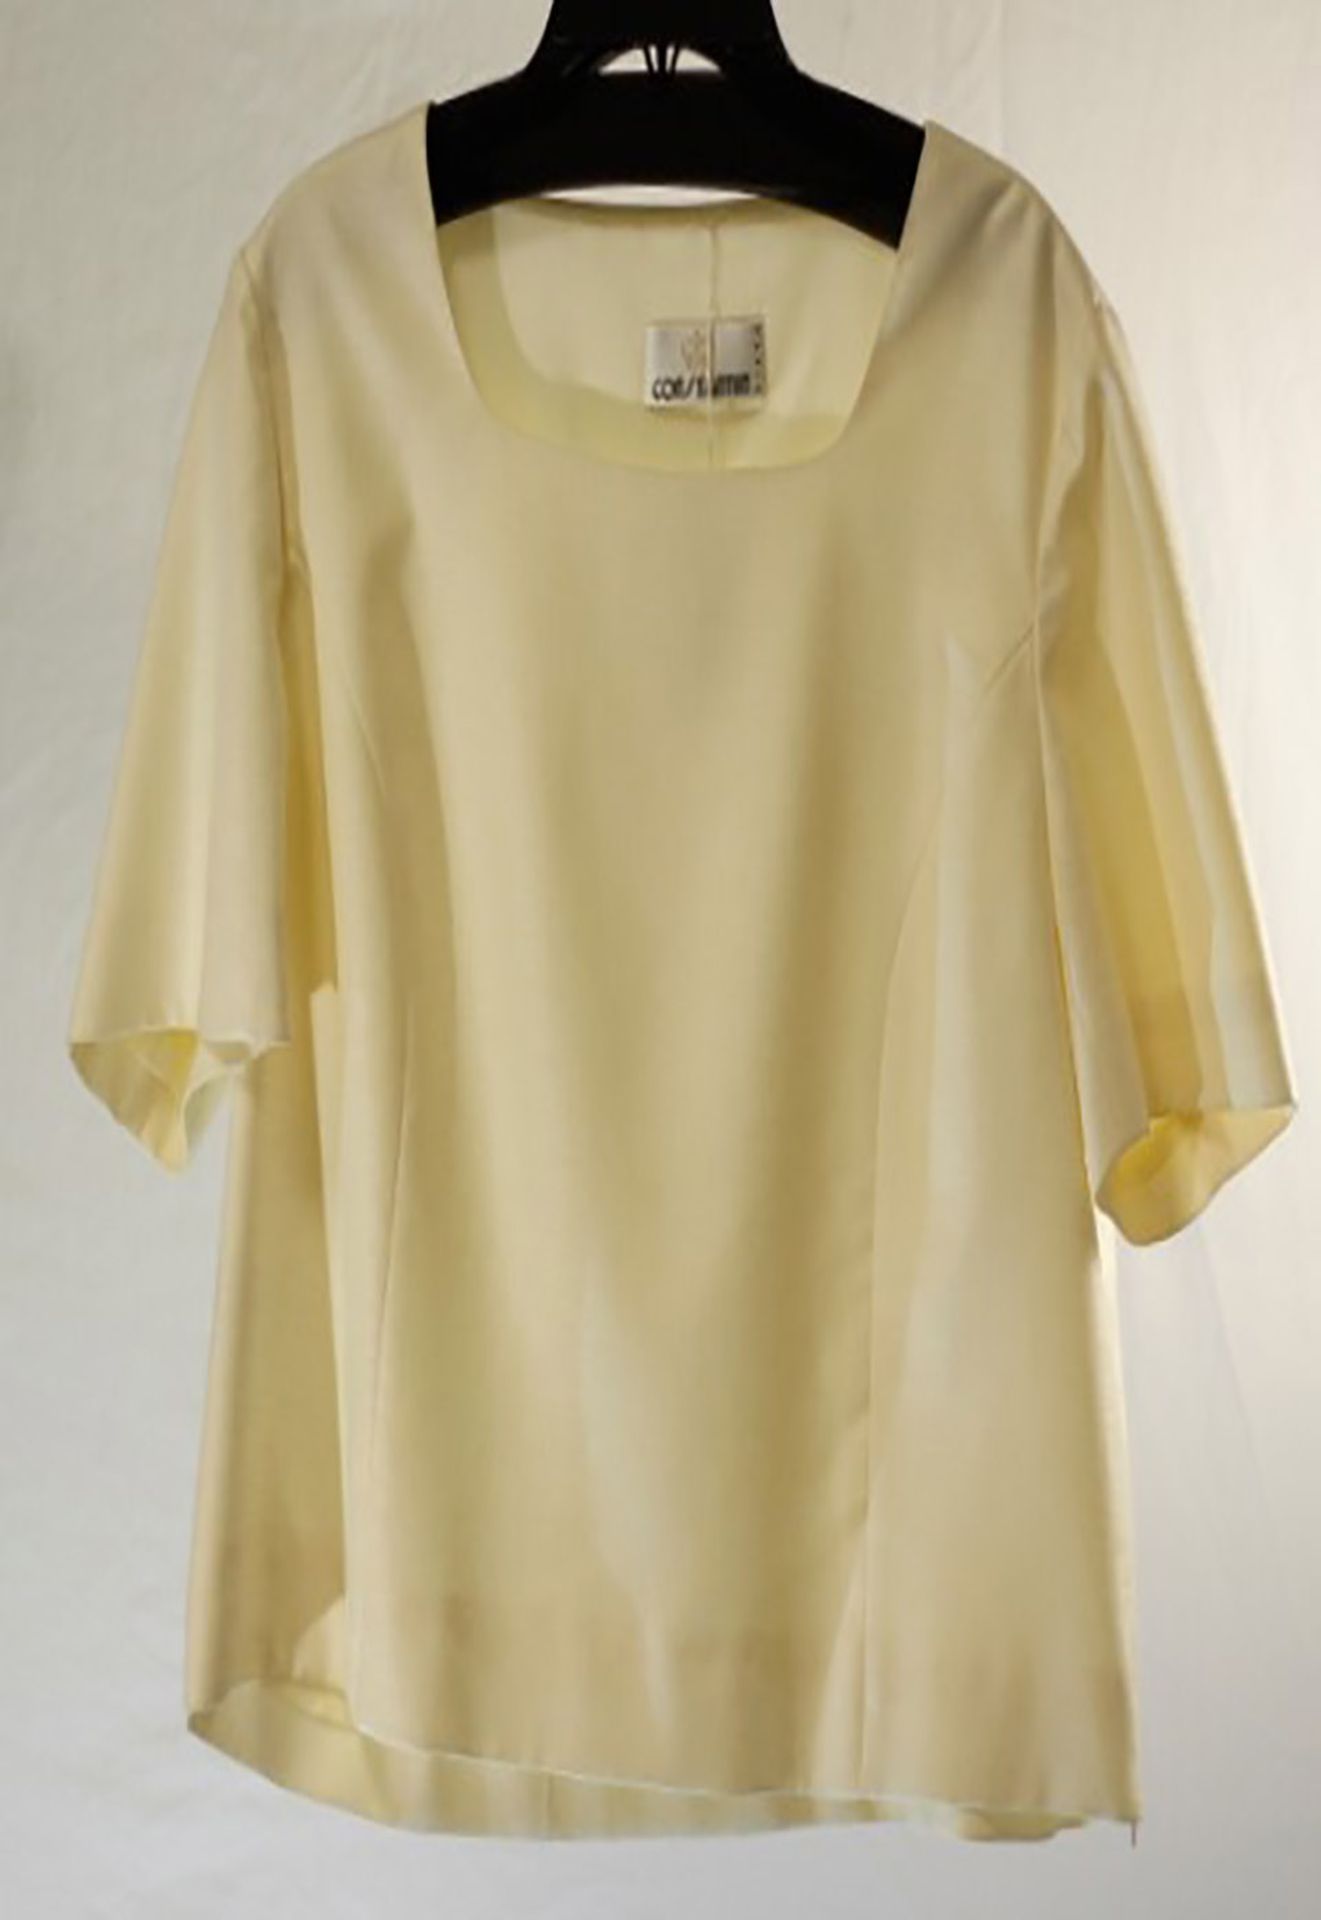 1 x Constantin Paris Cream Top - Size: 22 - Material: 100% Polyester - From a High End Clothing